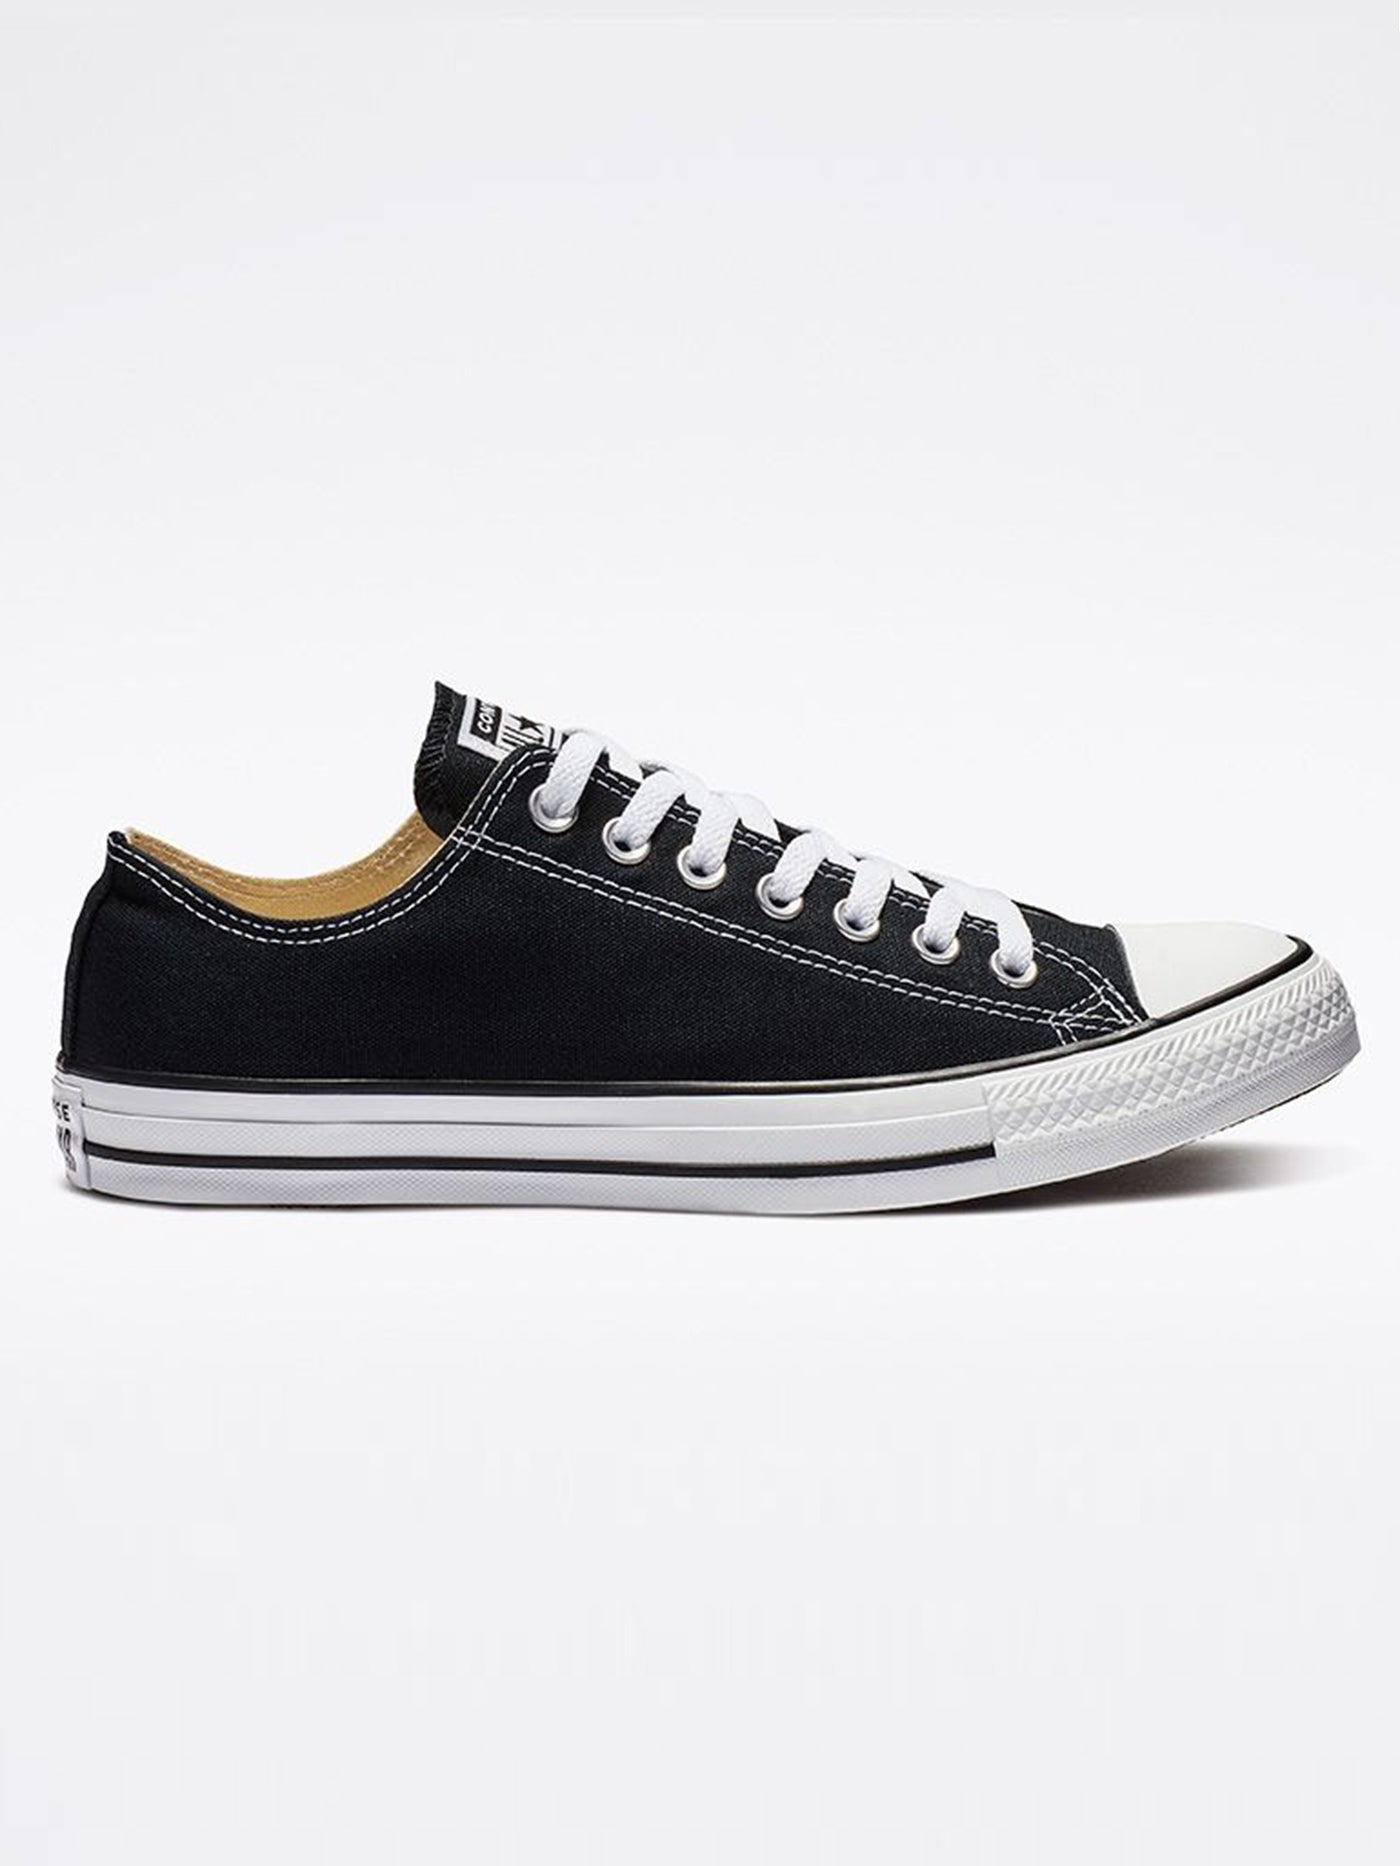 Converse Chuck Taylor All Star Black Shoes